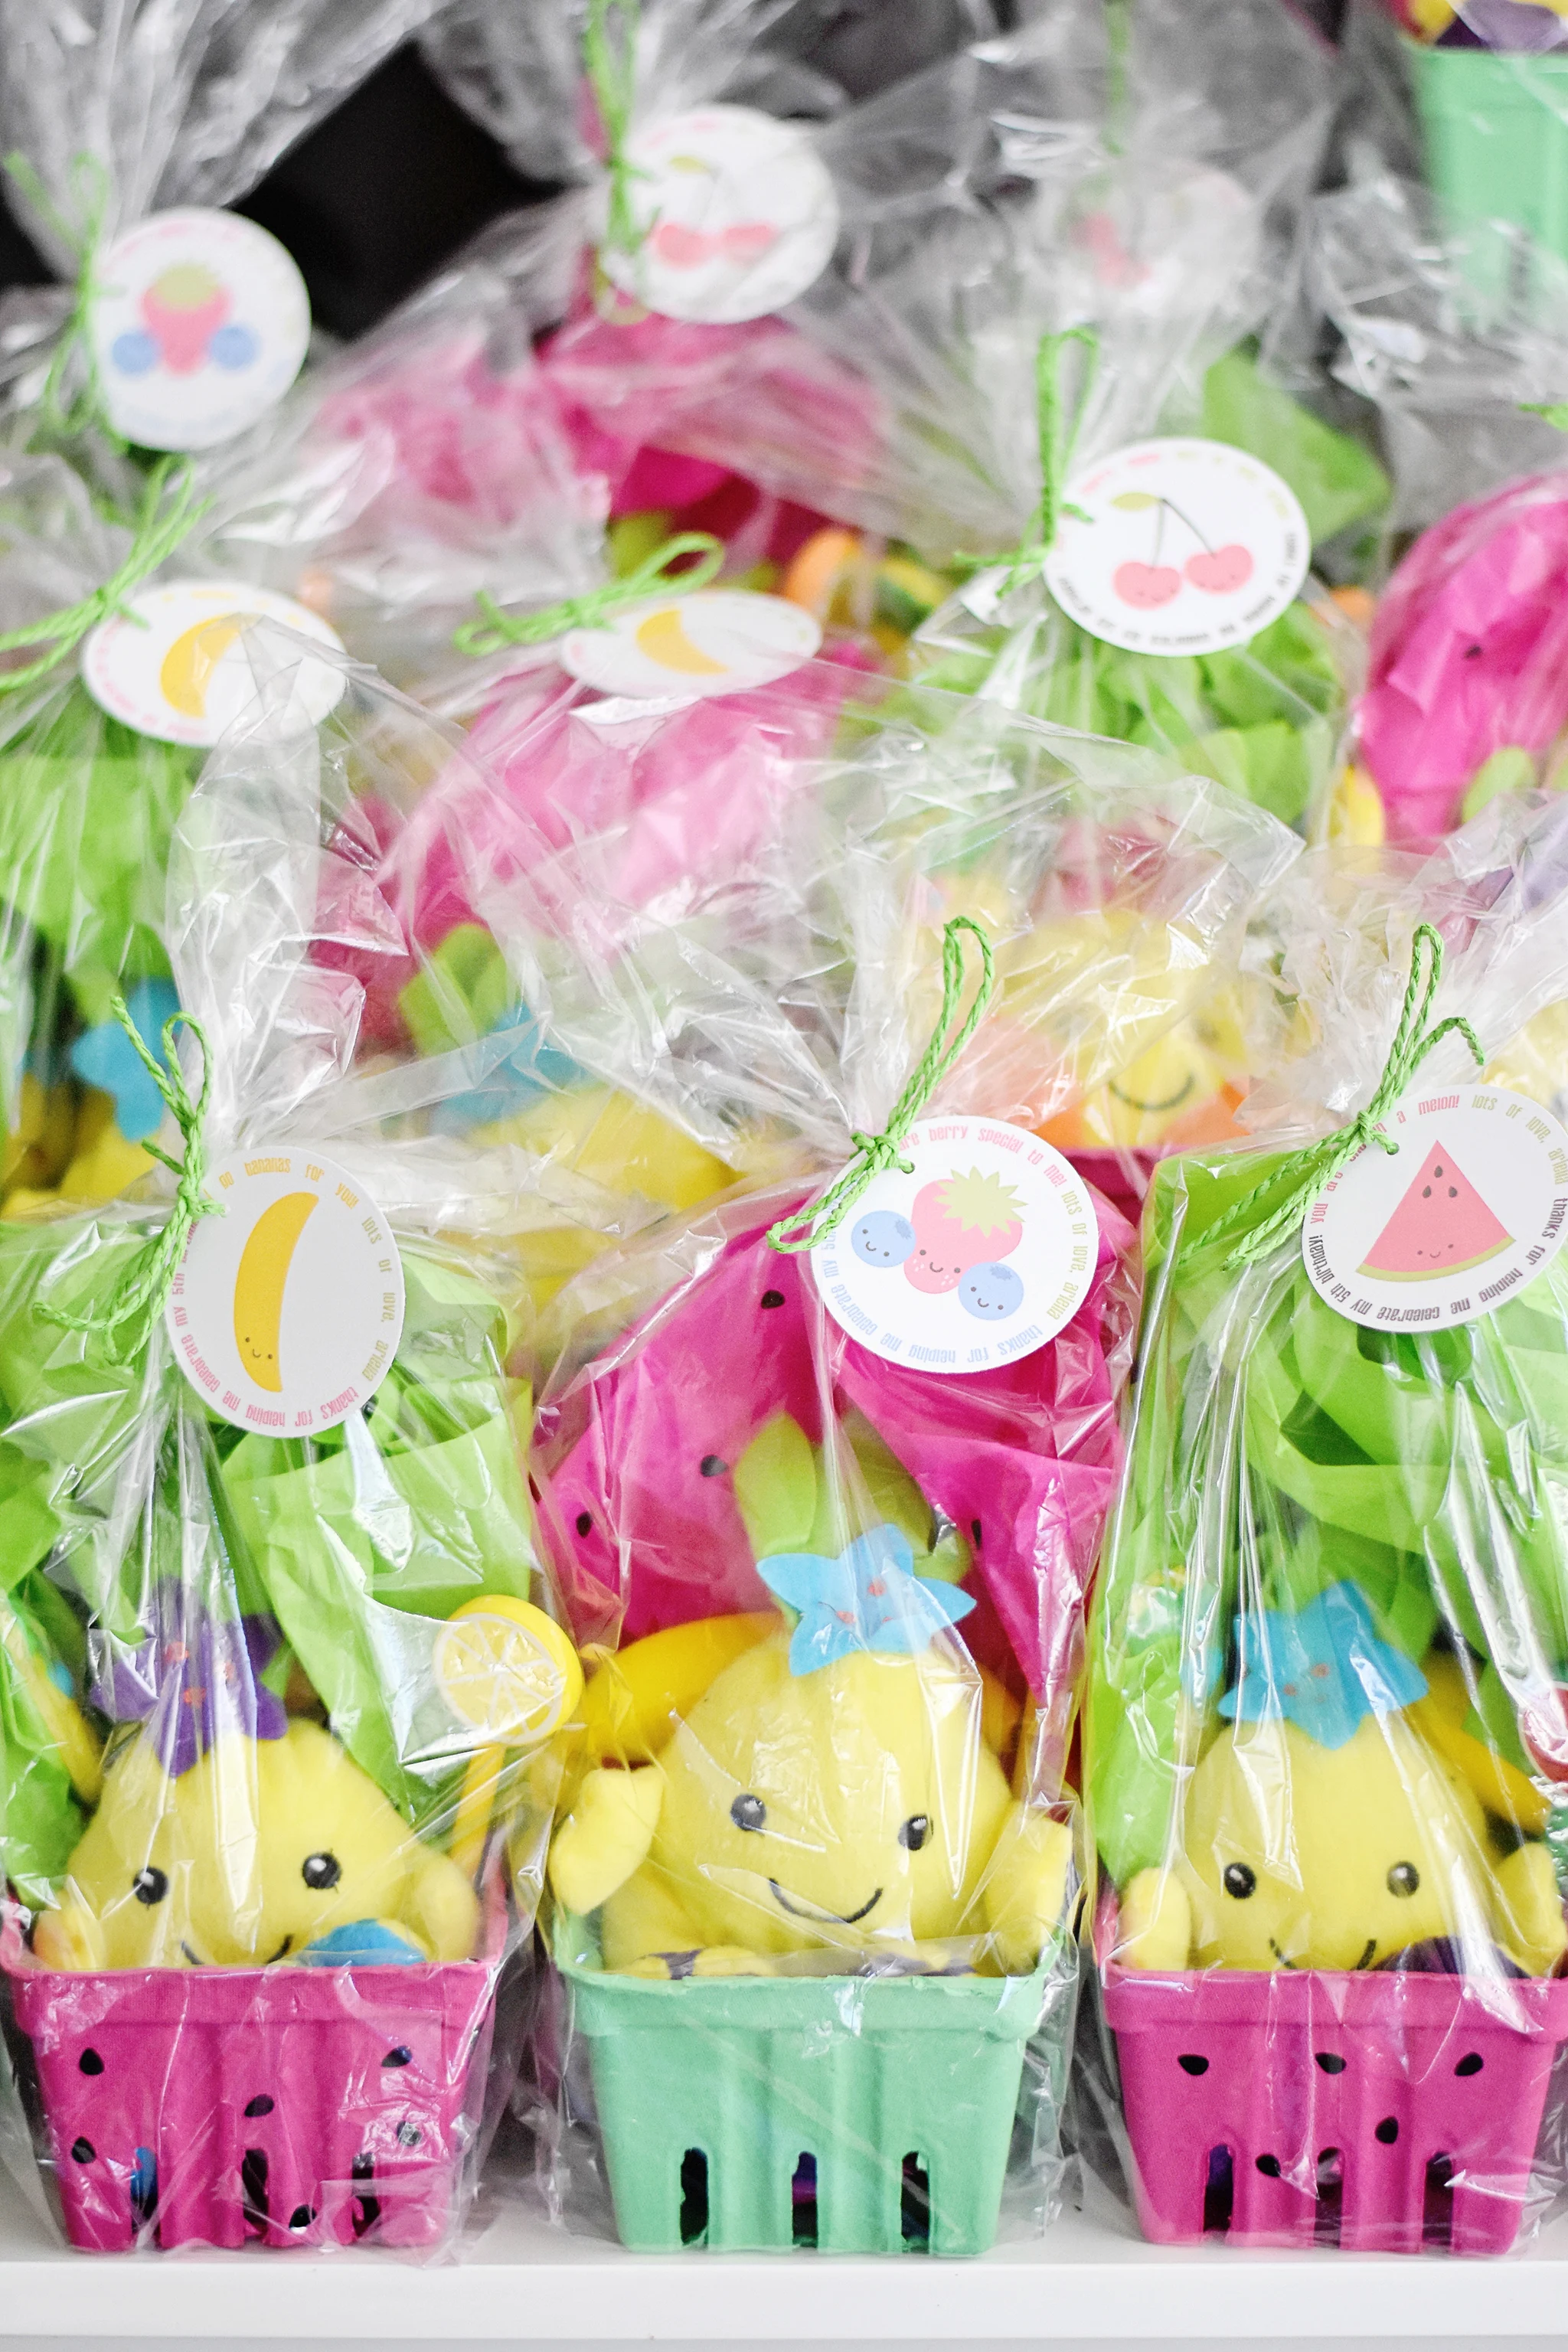 Party Favors 101: How to Create Favors Kids (and Parents!) will